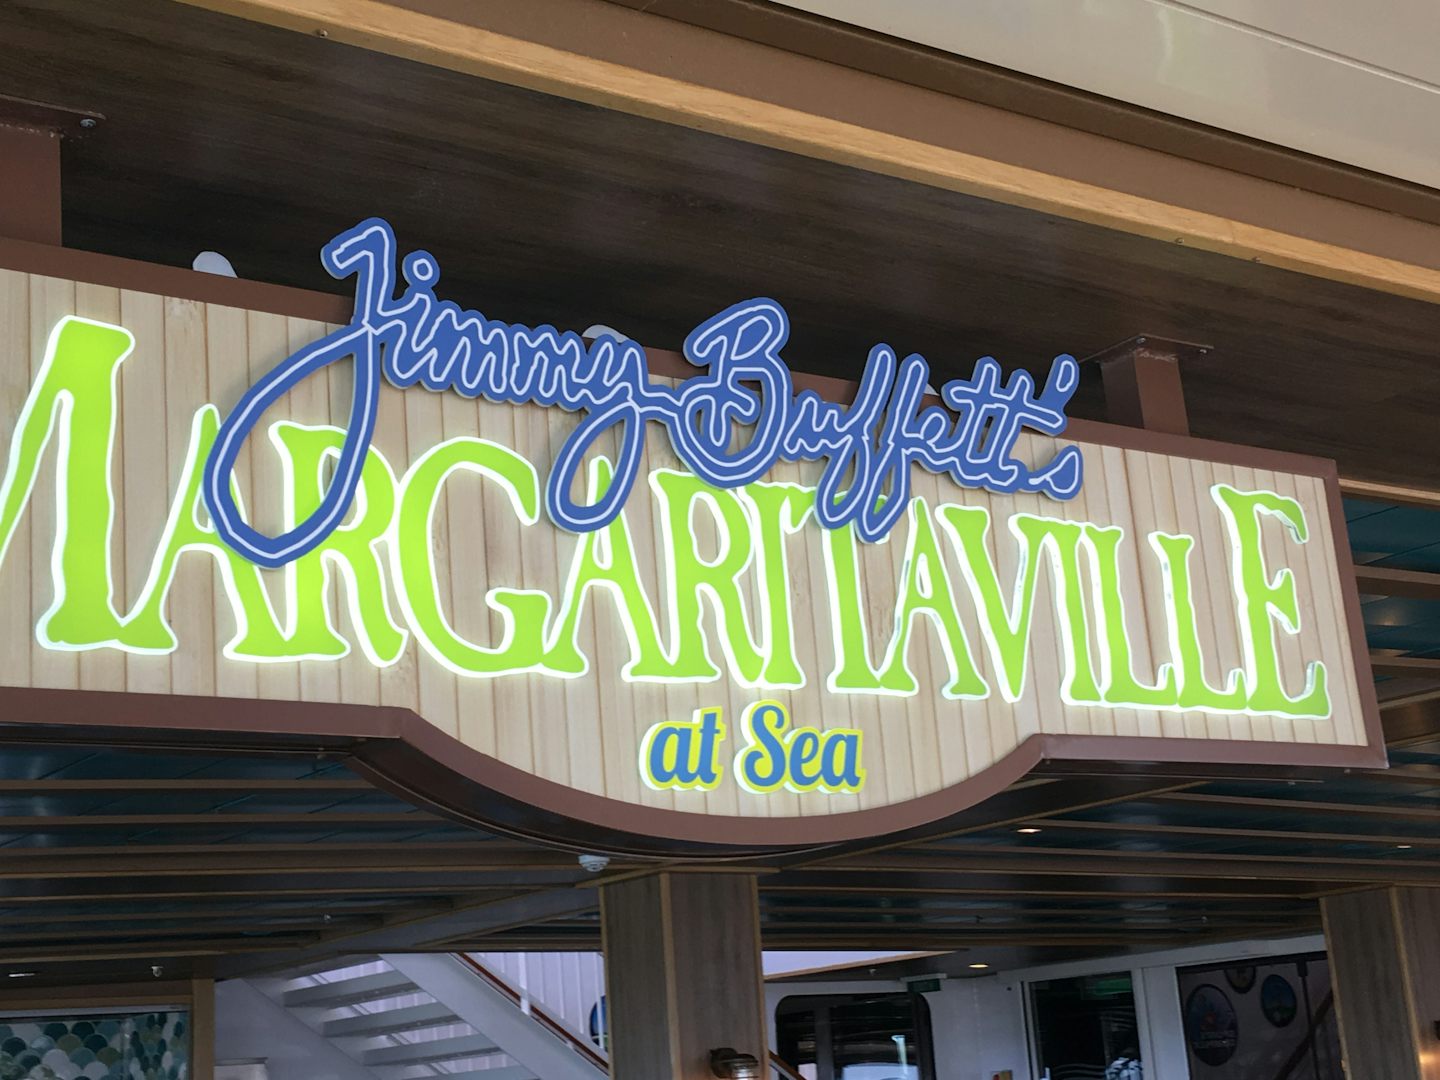 This is the sign from the getaway’s Margaritaville at Sea.